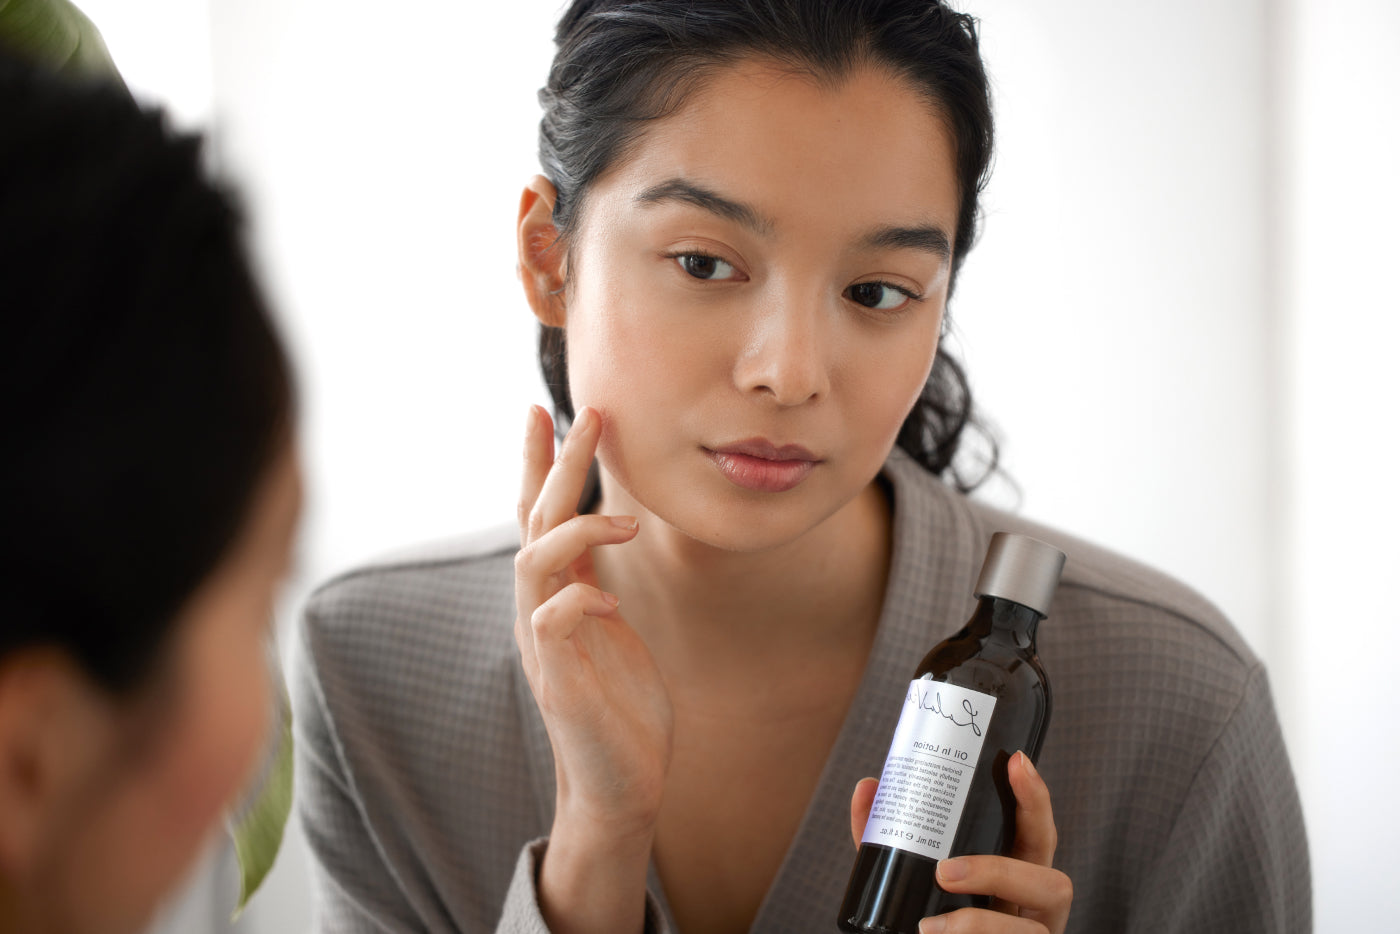 Anti-Aging: When Should You Start Using Products and Procedures?